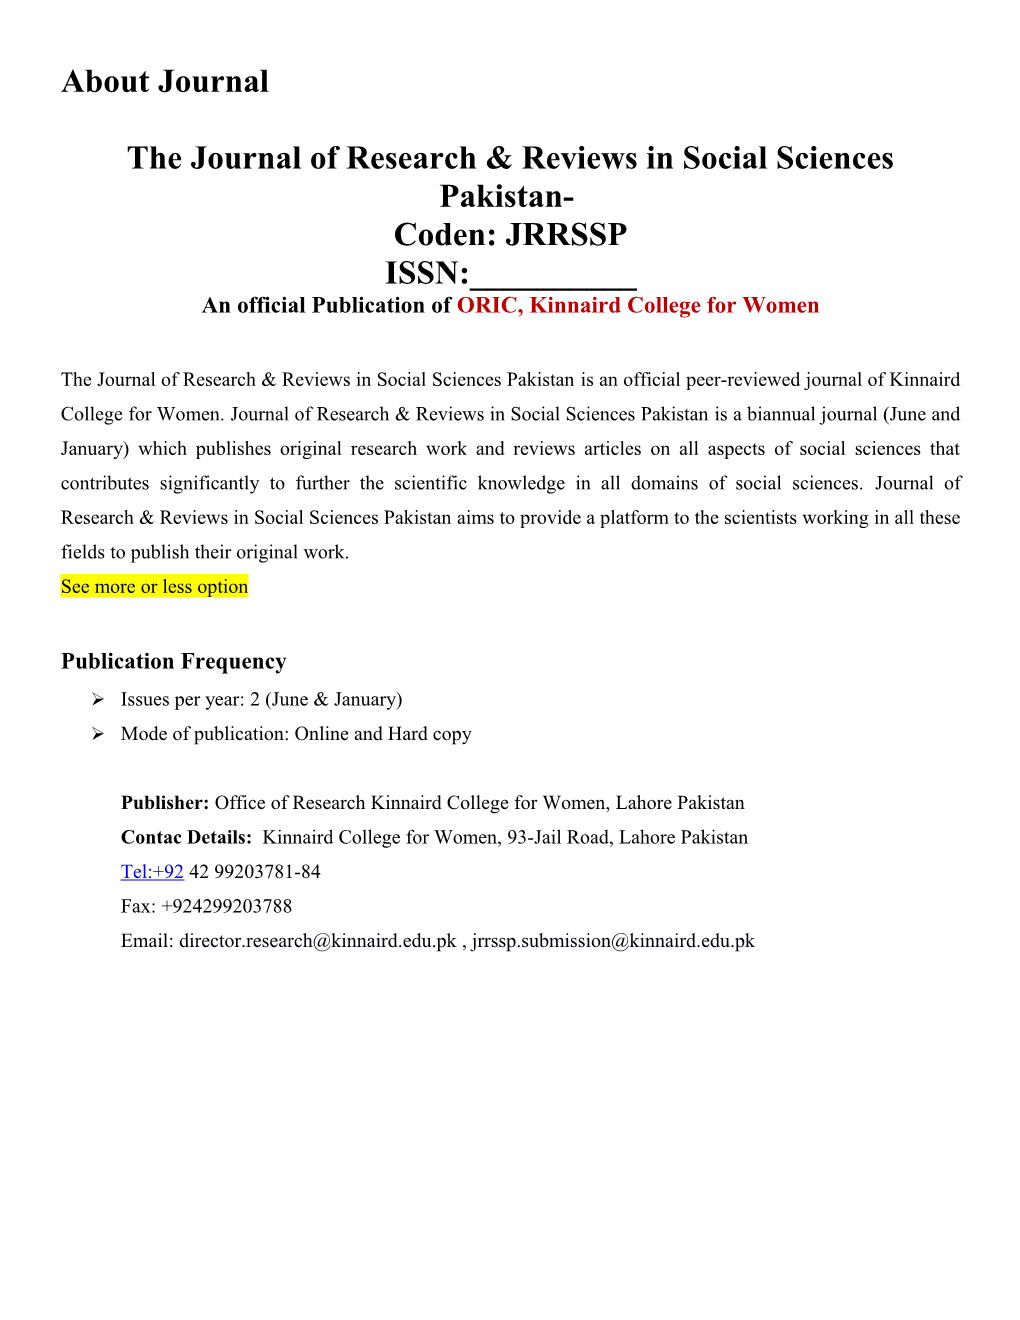 The Journal of Research & Reviews in Social Sciences Pakistan